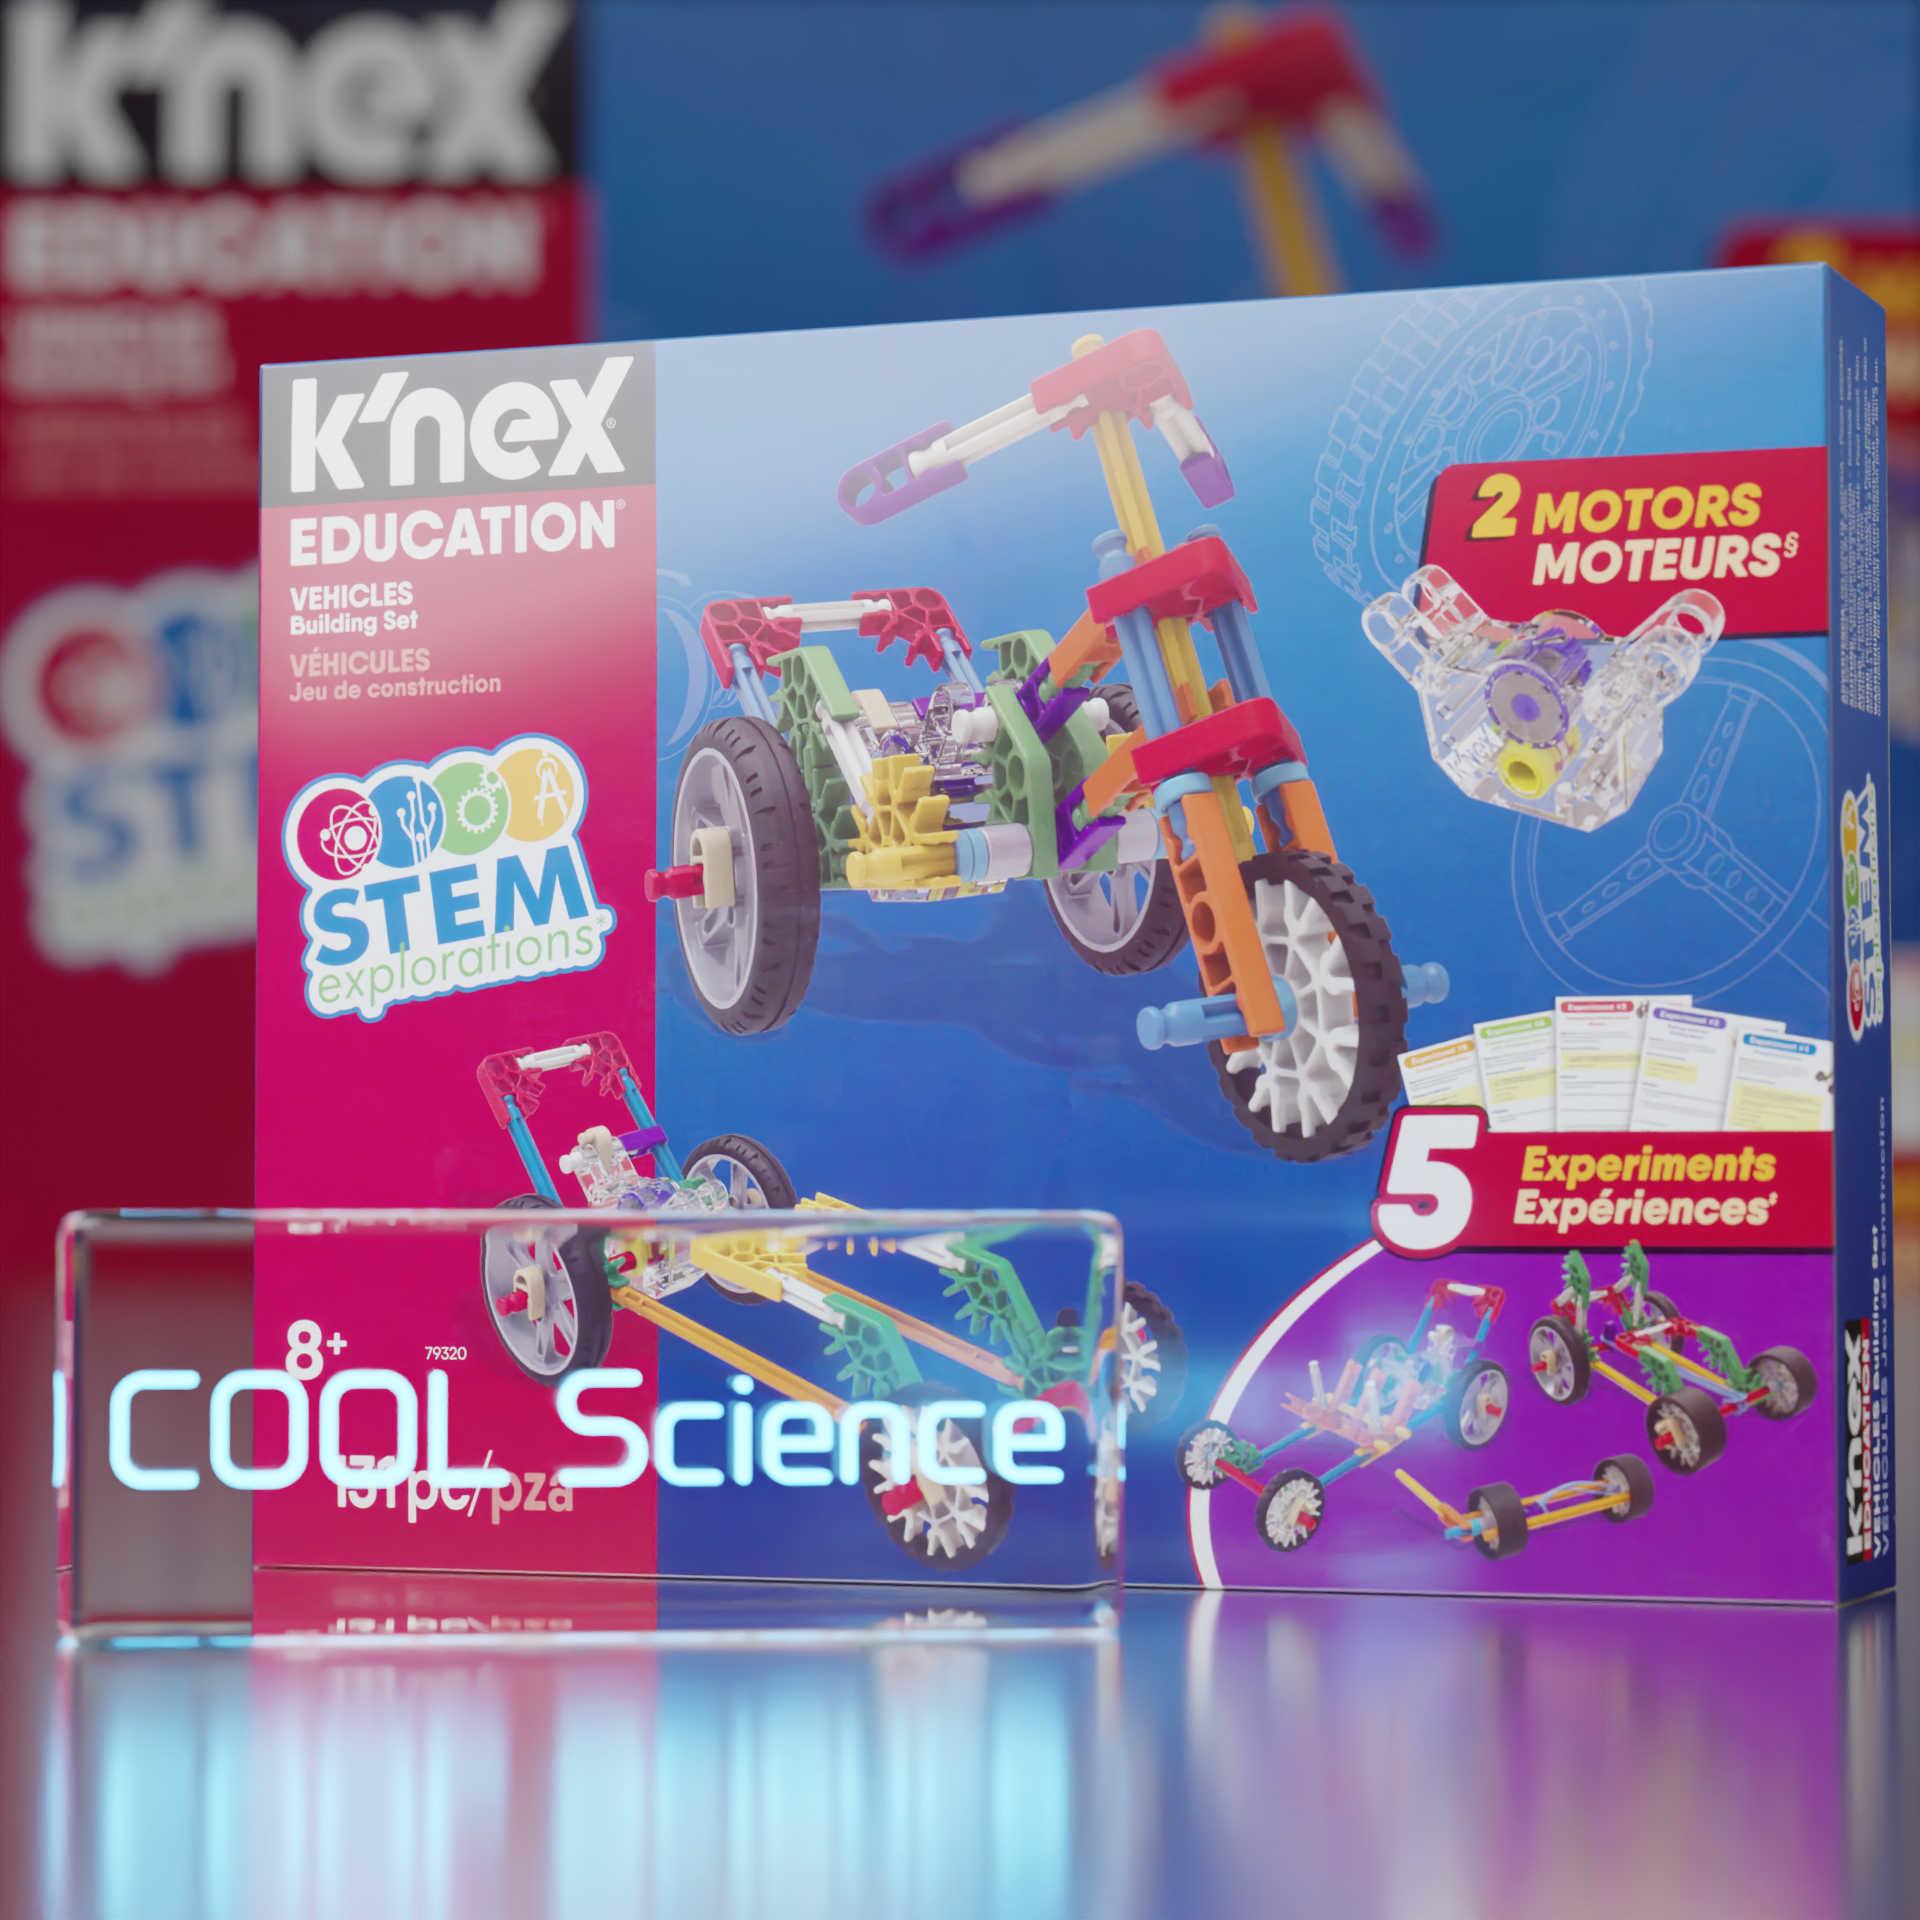 Front View of the K'NEX Education Vehicles Building Set box